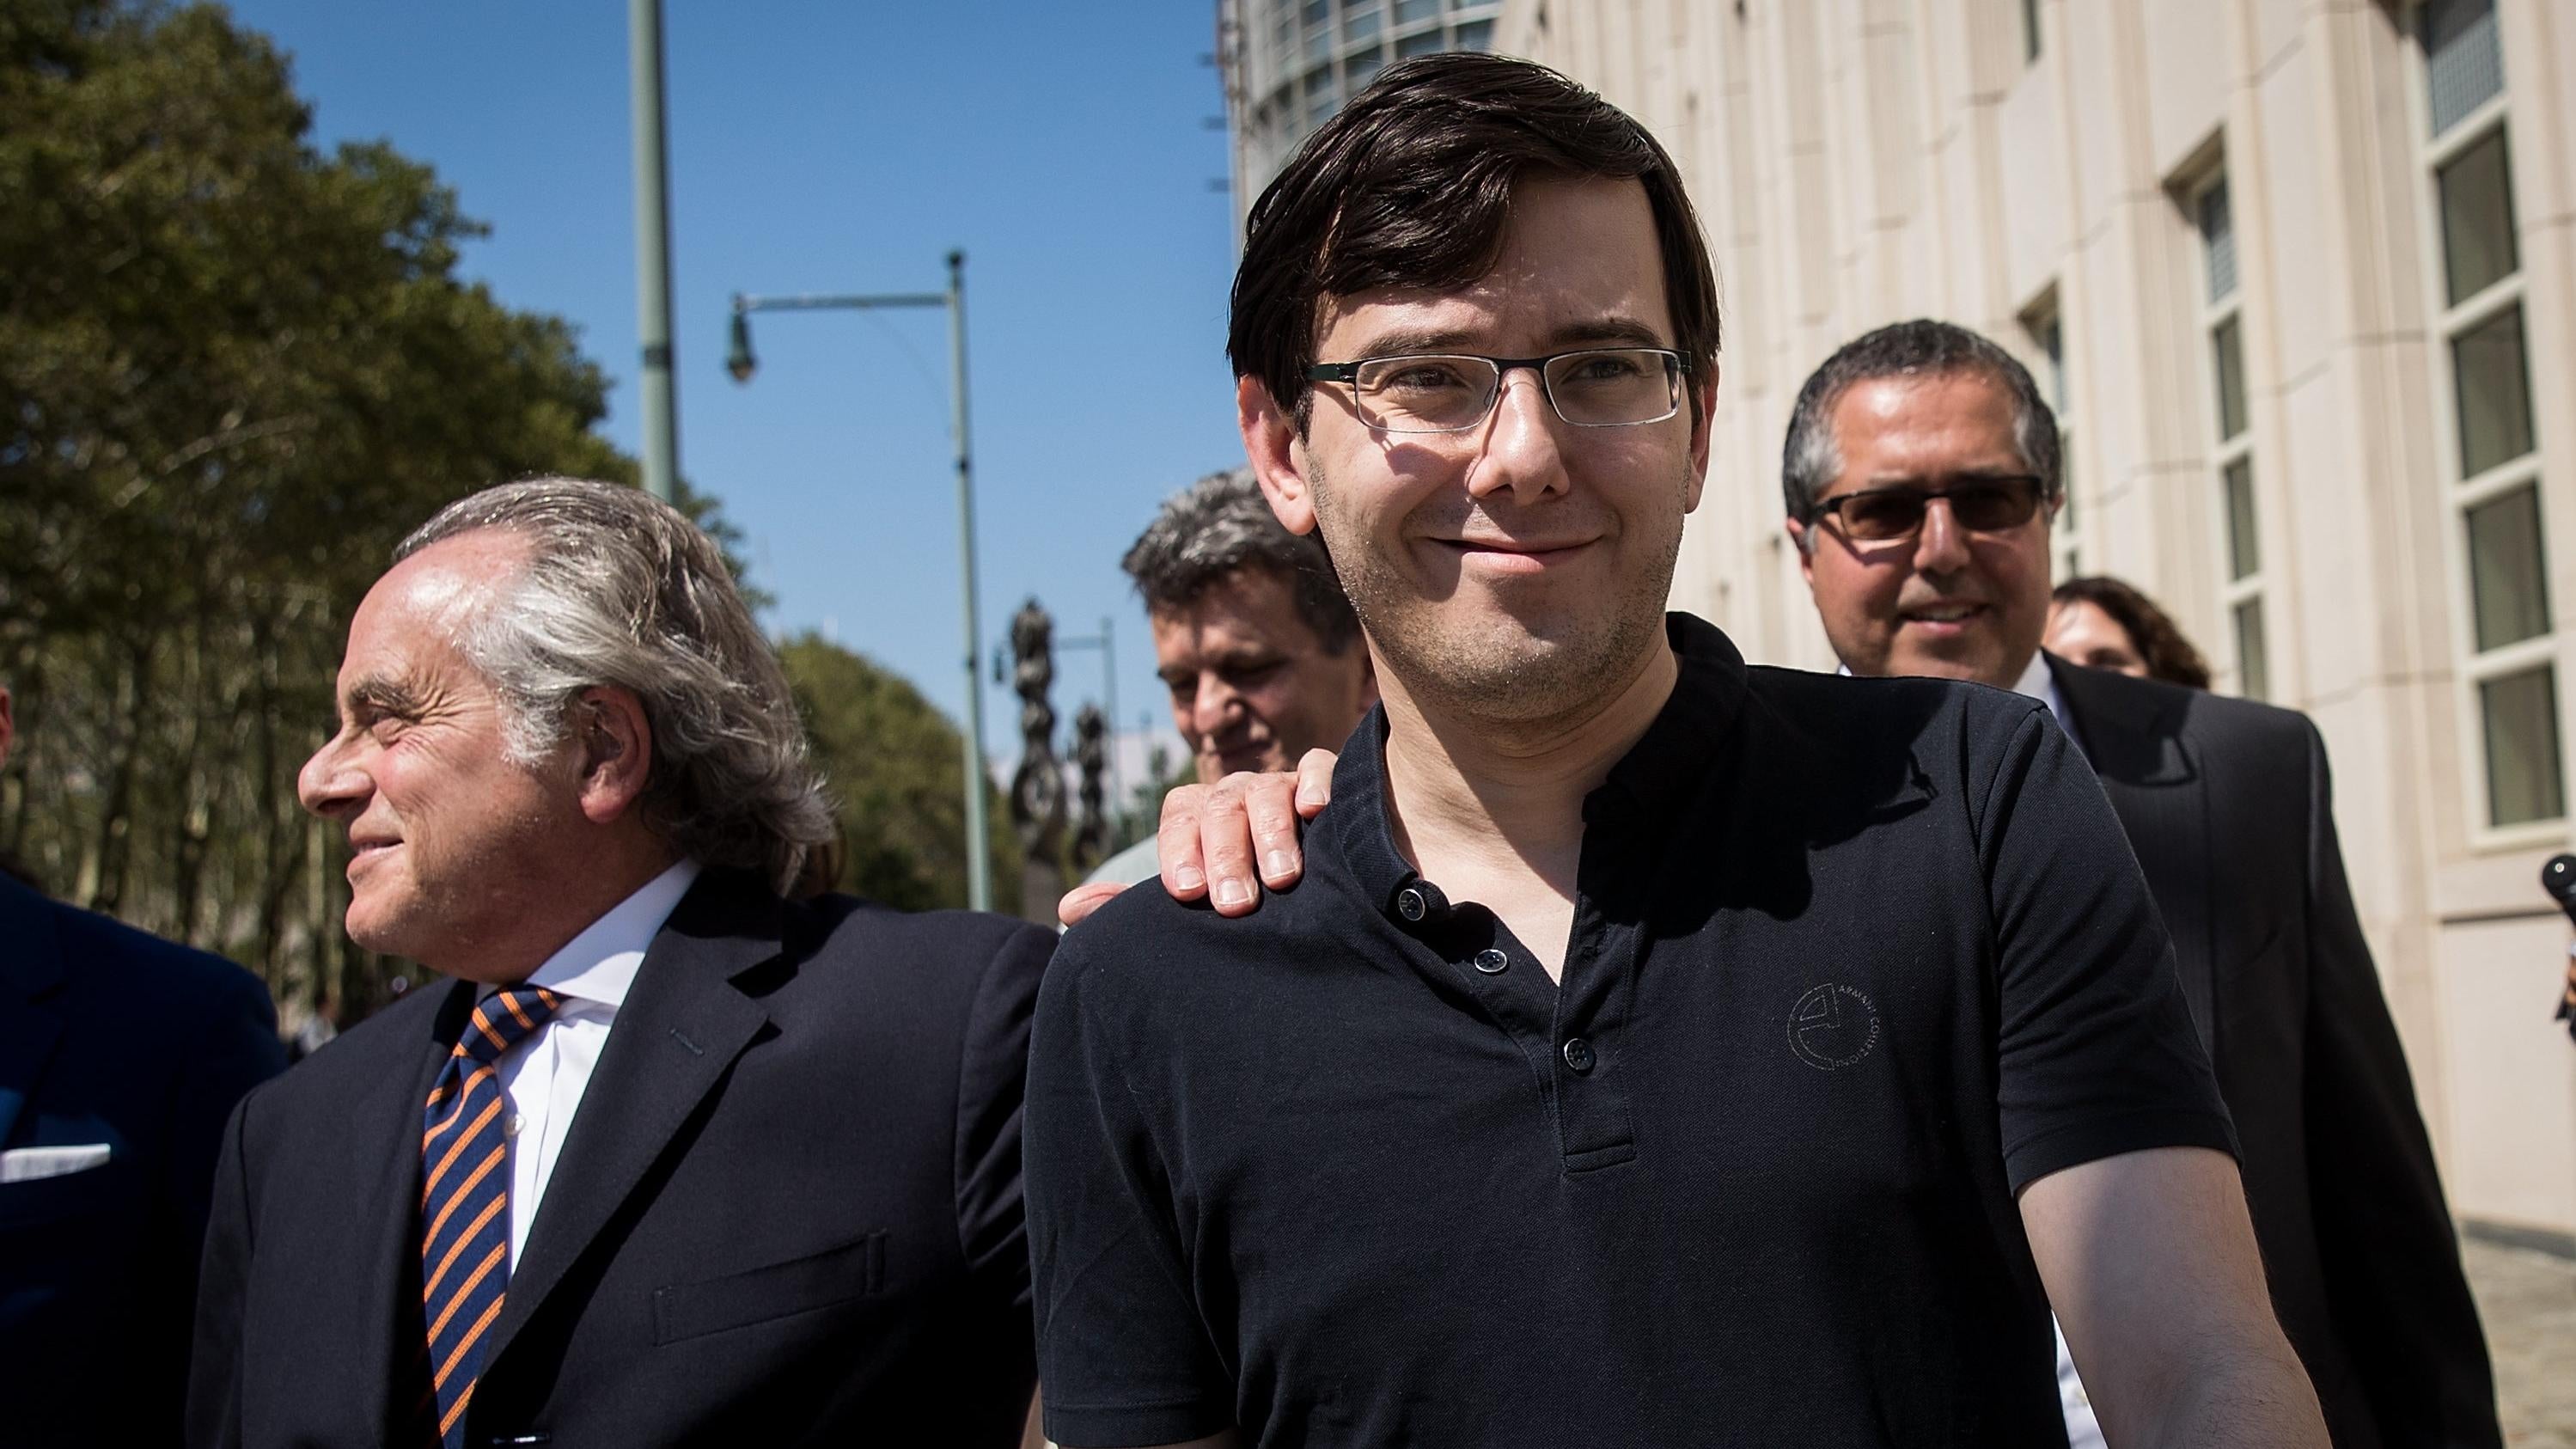 Martin Shkreli was found guilty of securities fraud back in 2017. Now out of jail, he's looking for a fresh start in Web3. (Photo: Drew Angerer, Getty Images)